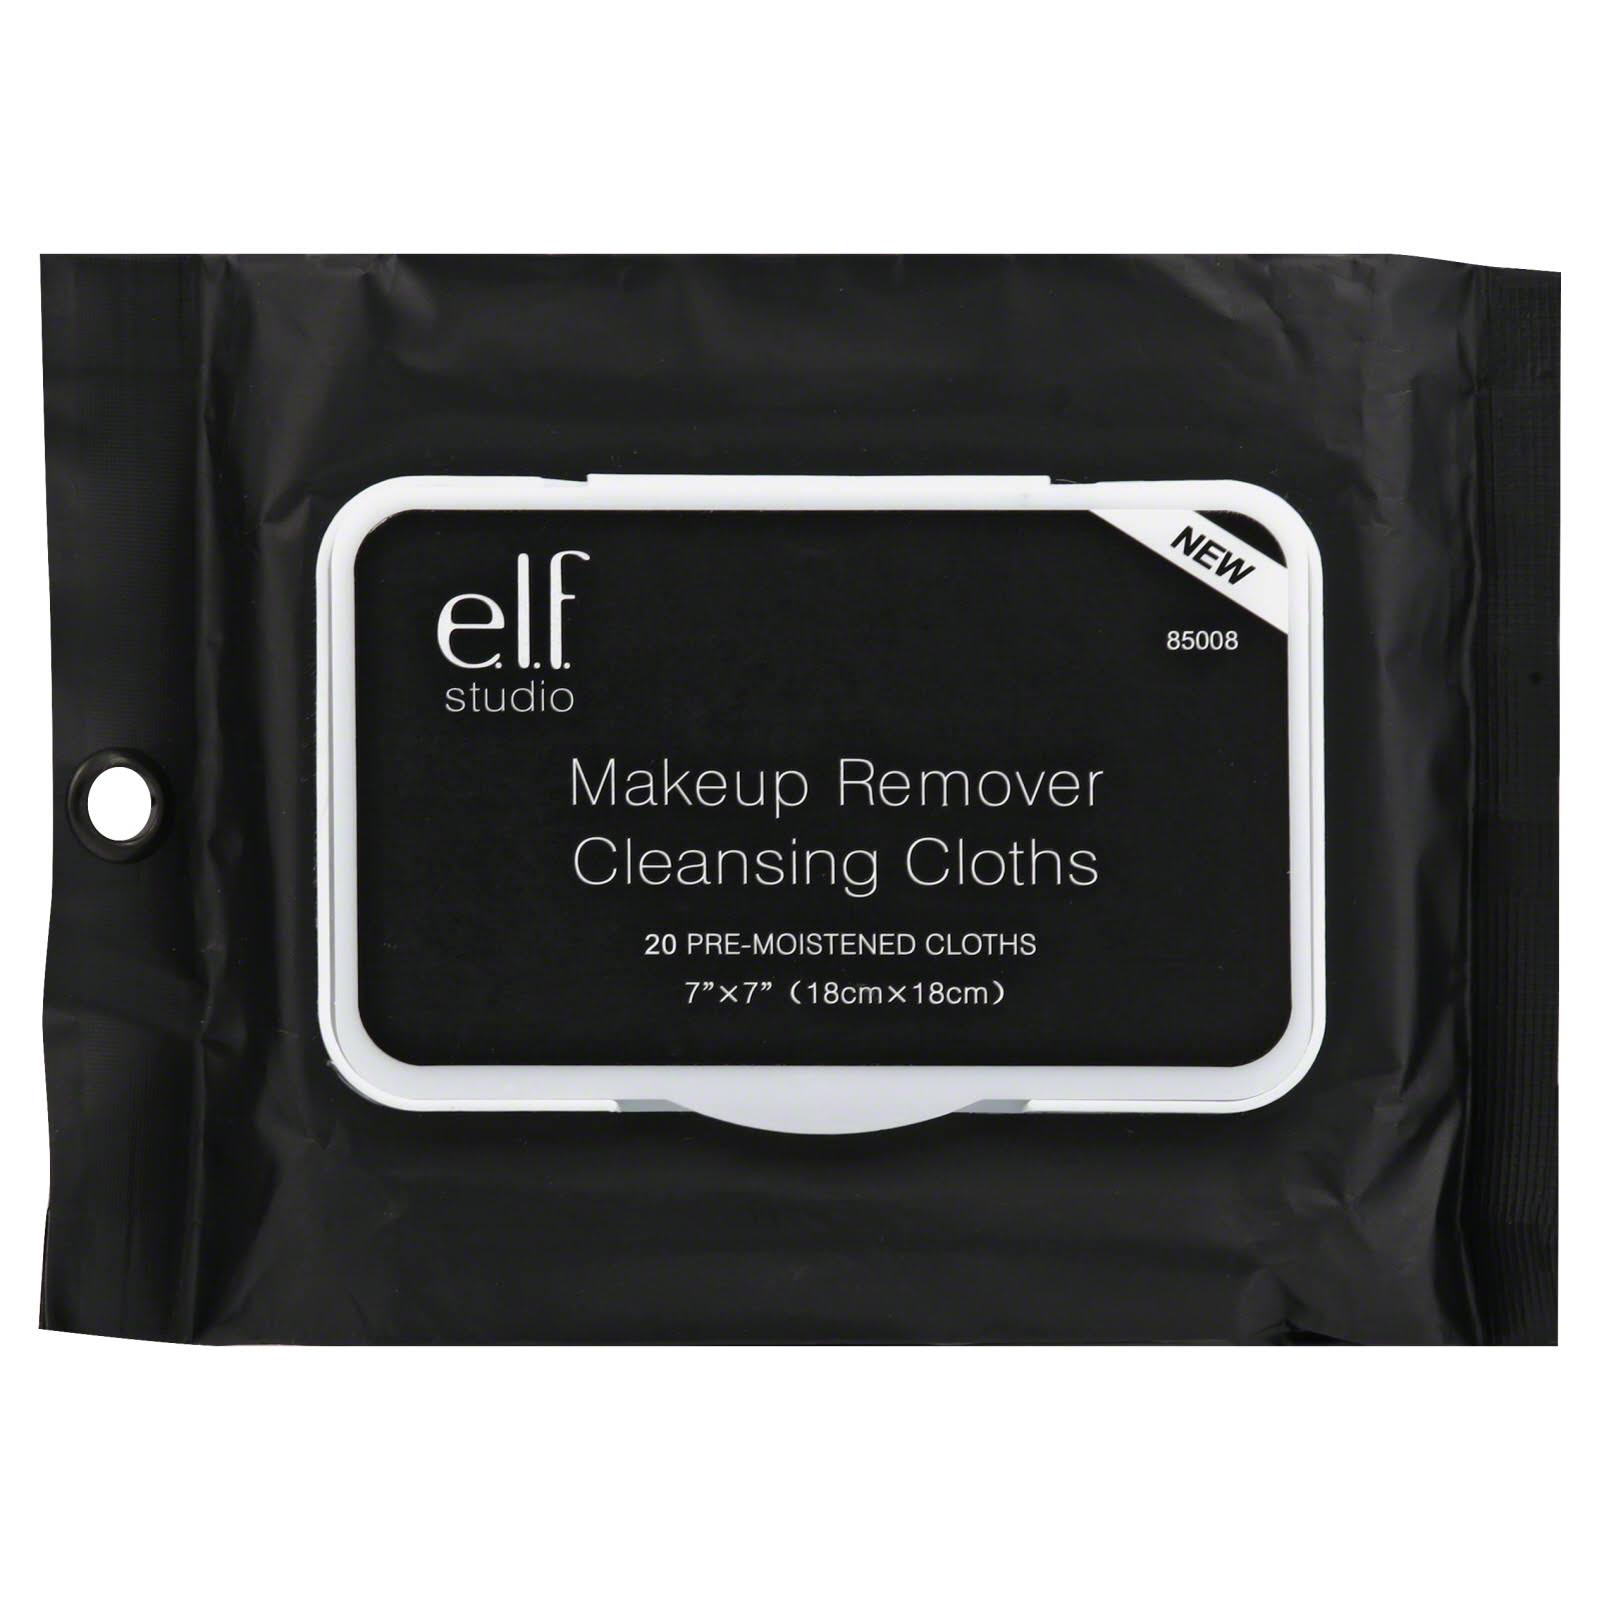 Elf Makeup Remover Cleansing Cloths - 20ct